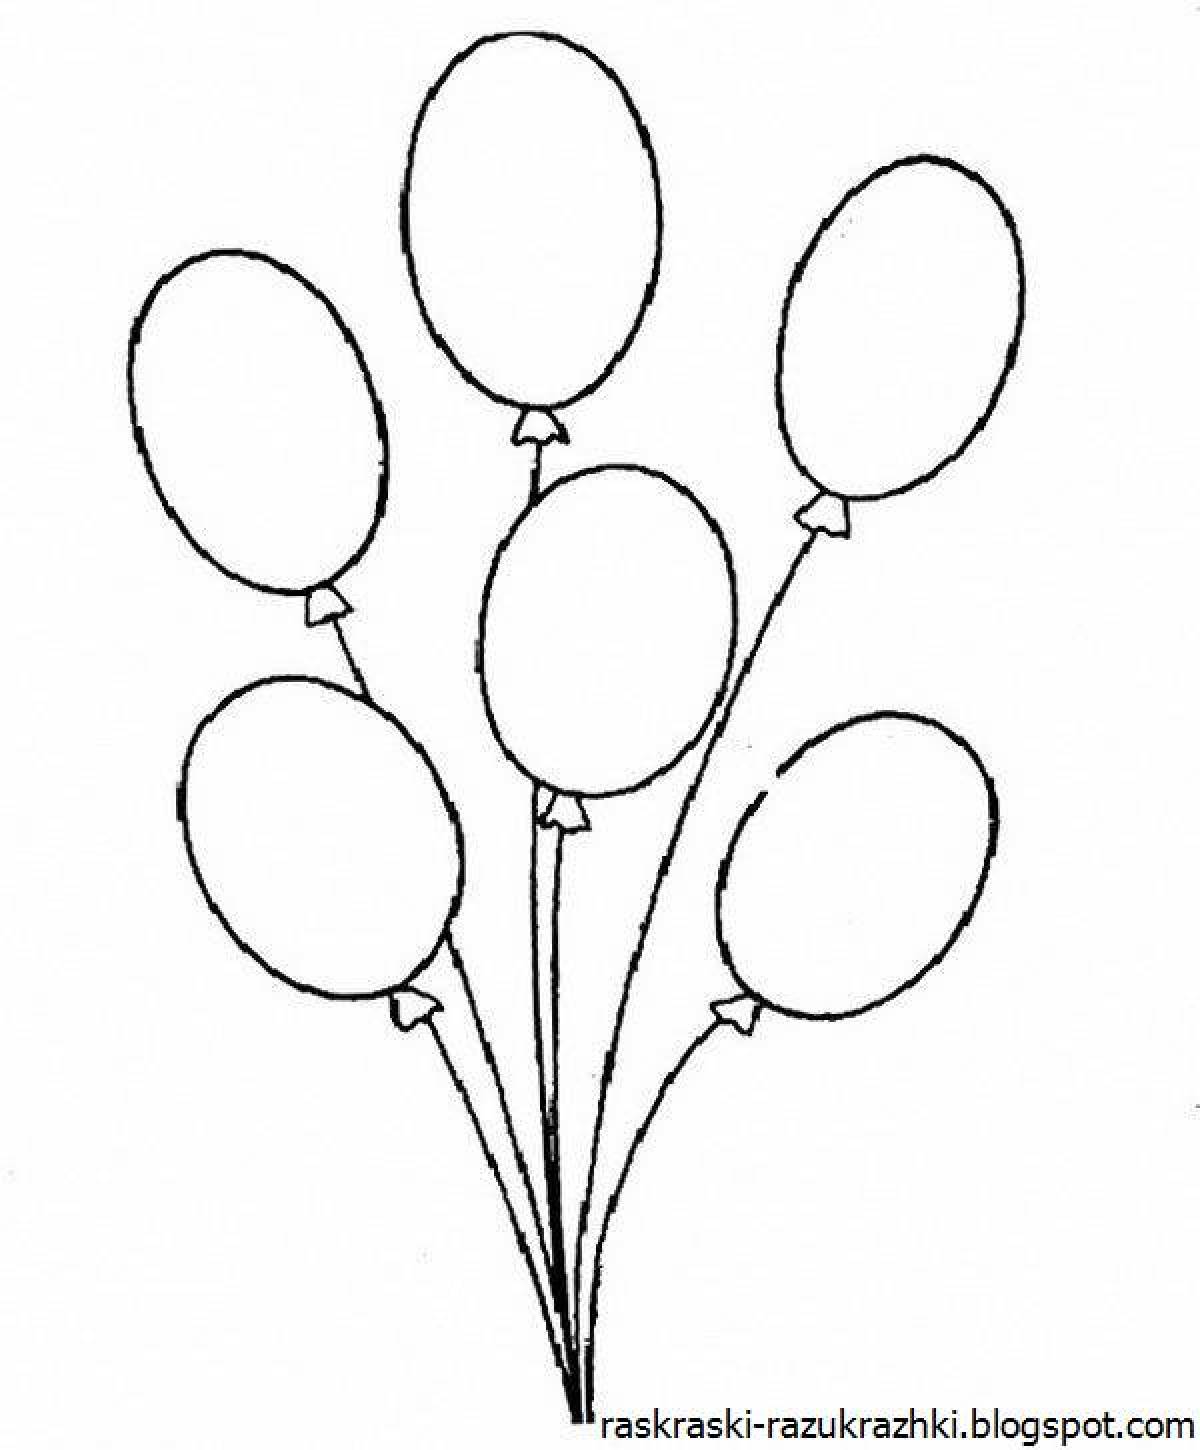 Coloring page nice balloons